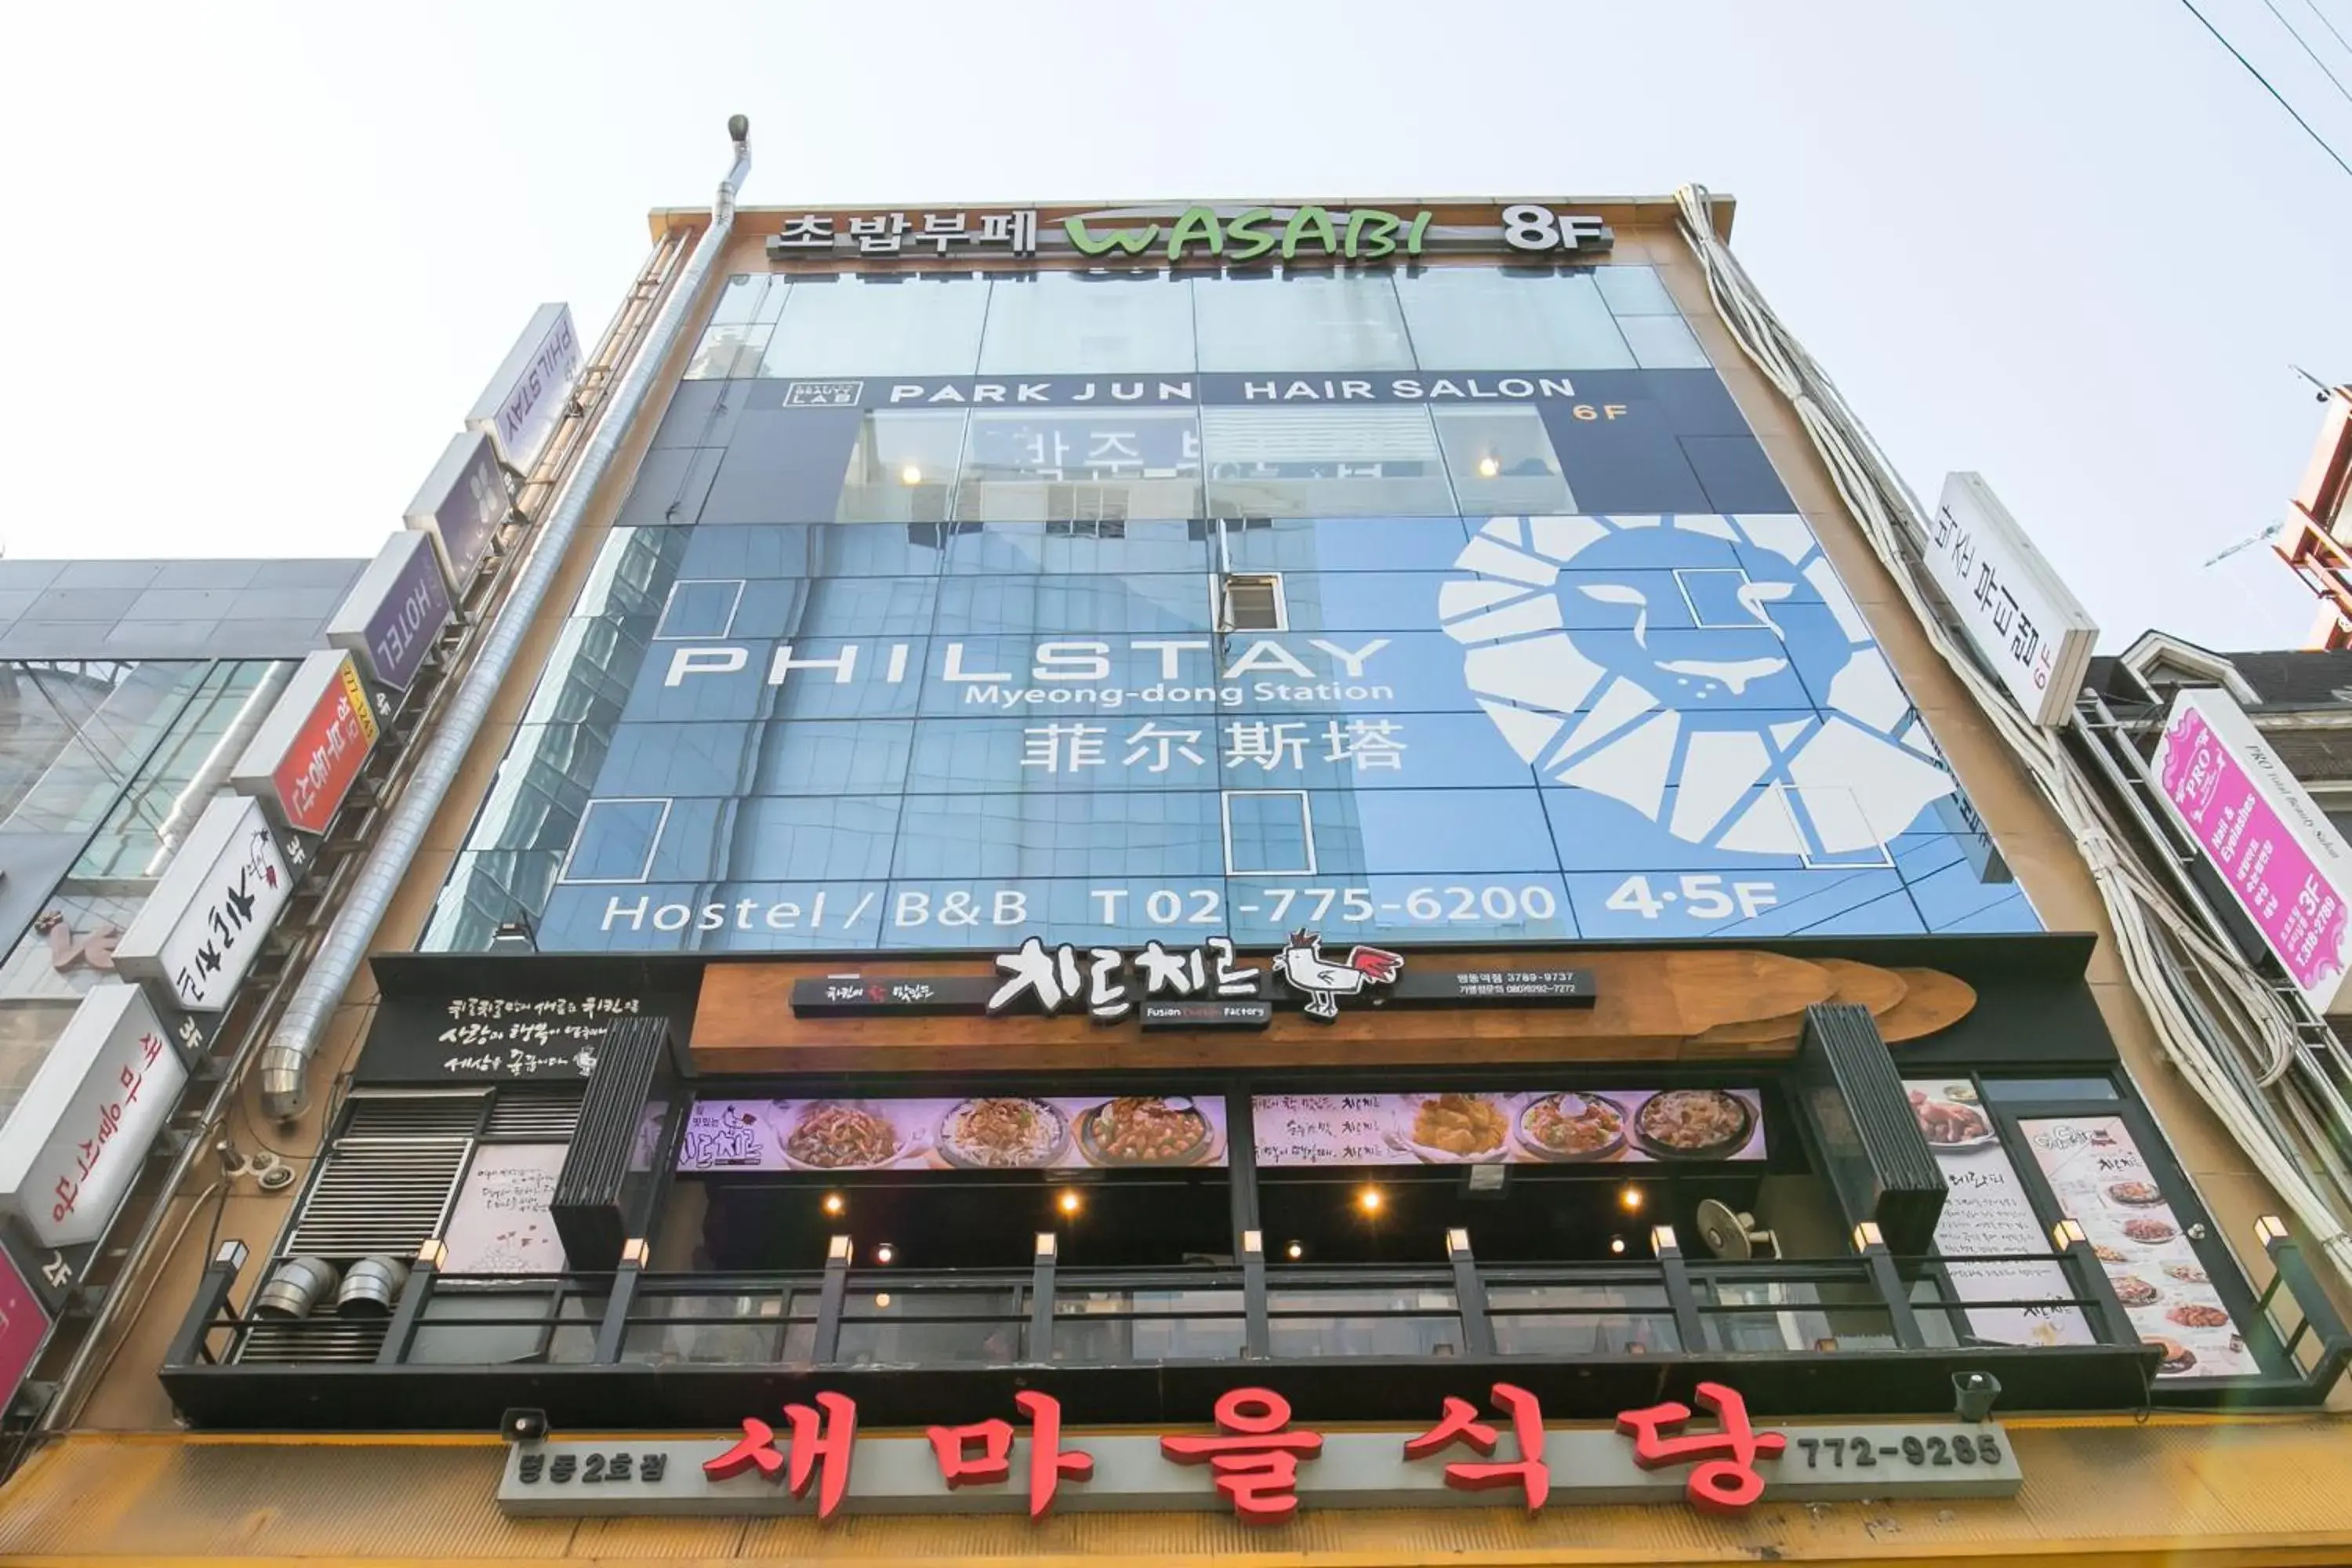 Property building in Philstay Myeongdong Station